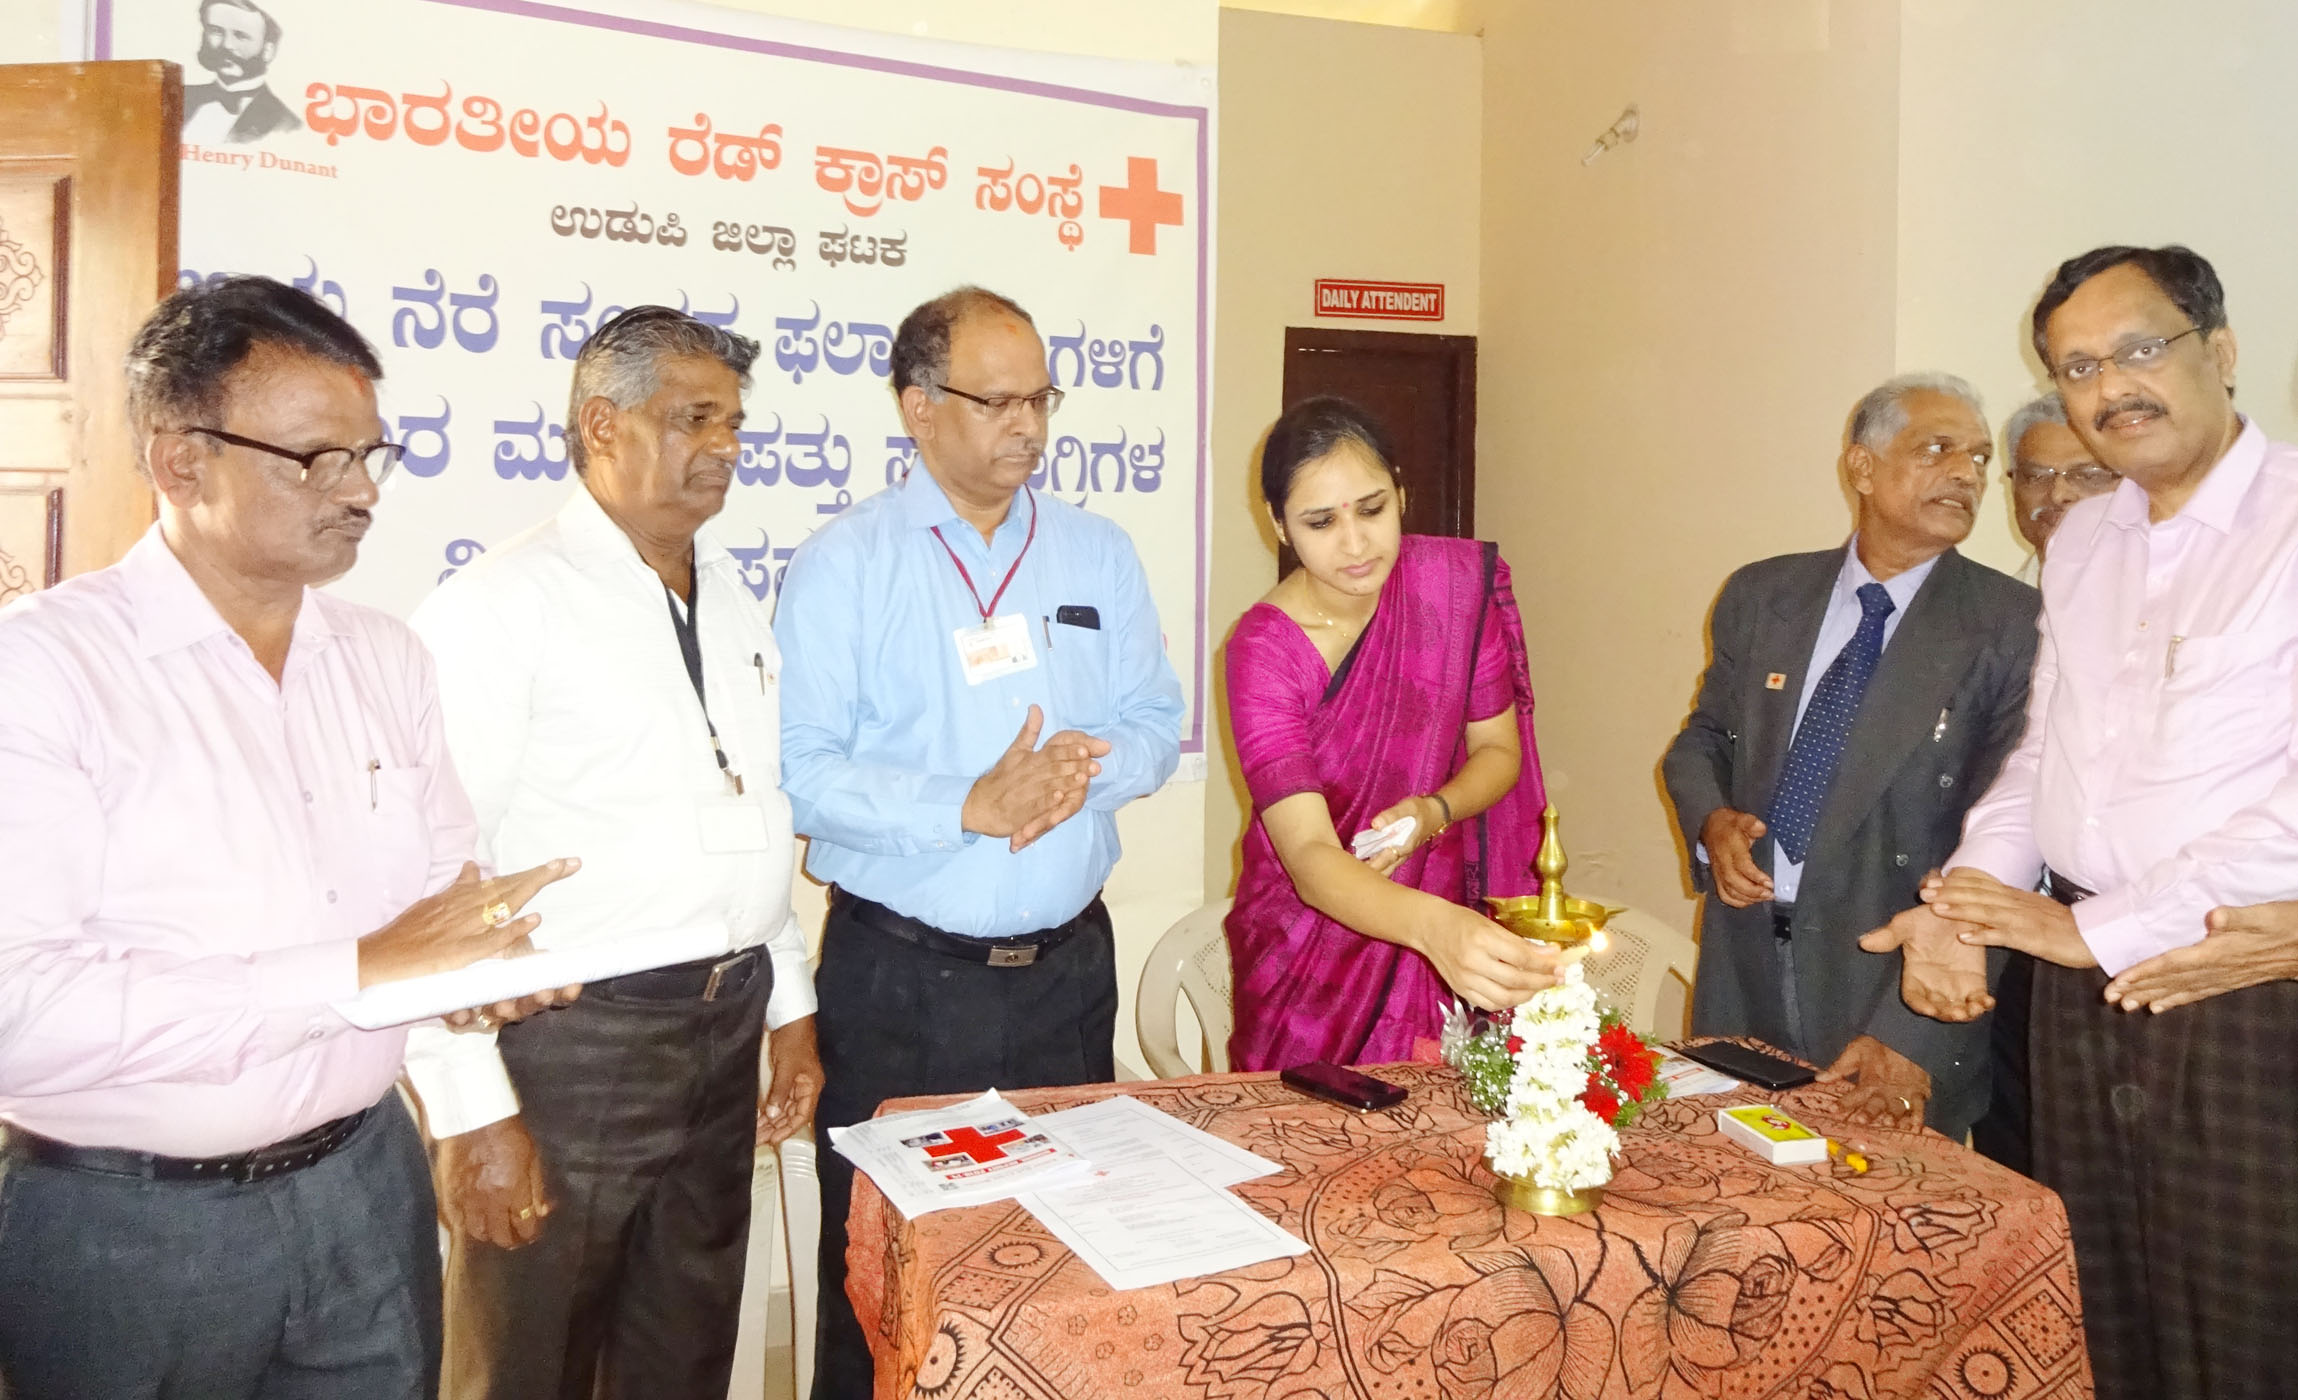 Give information about the social work of the Red Cross - Preety Gehlot, CEO of Udupi Zilla Panchayat